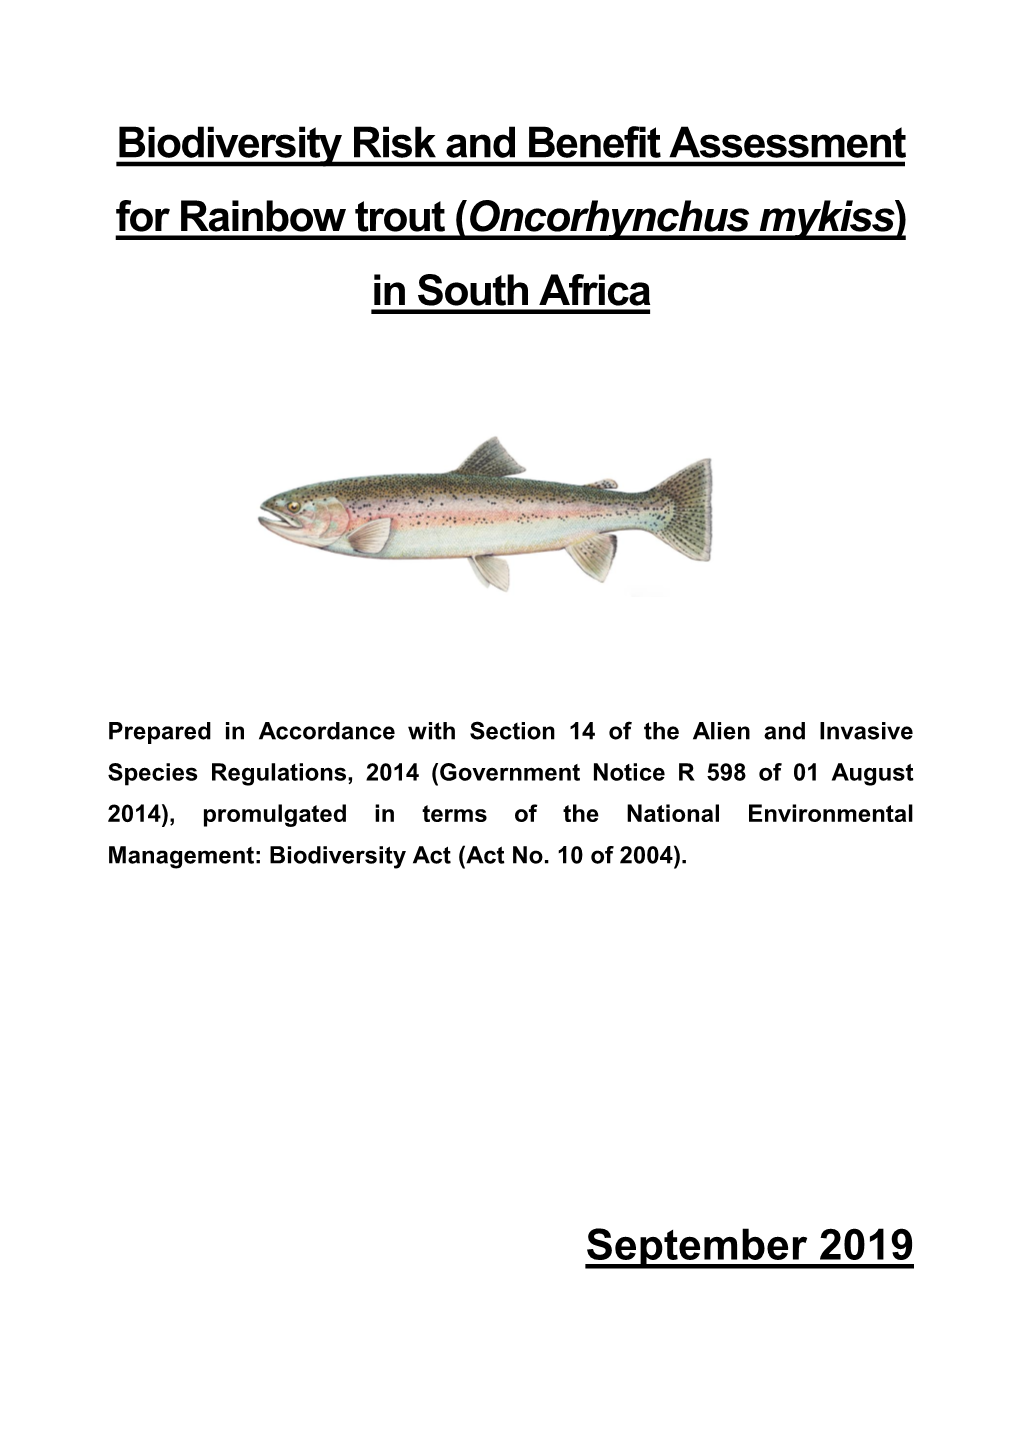 Biodiversity Risk and Benefit Assessment for Rainbow Trout (Oncorhynchus Mykiss) in South Africa